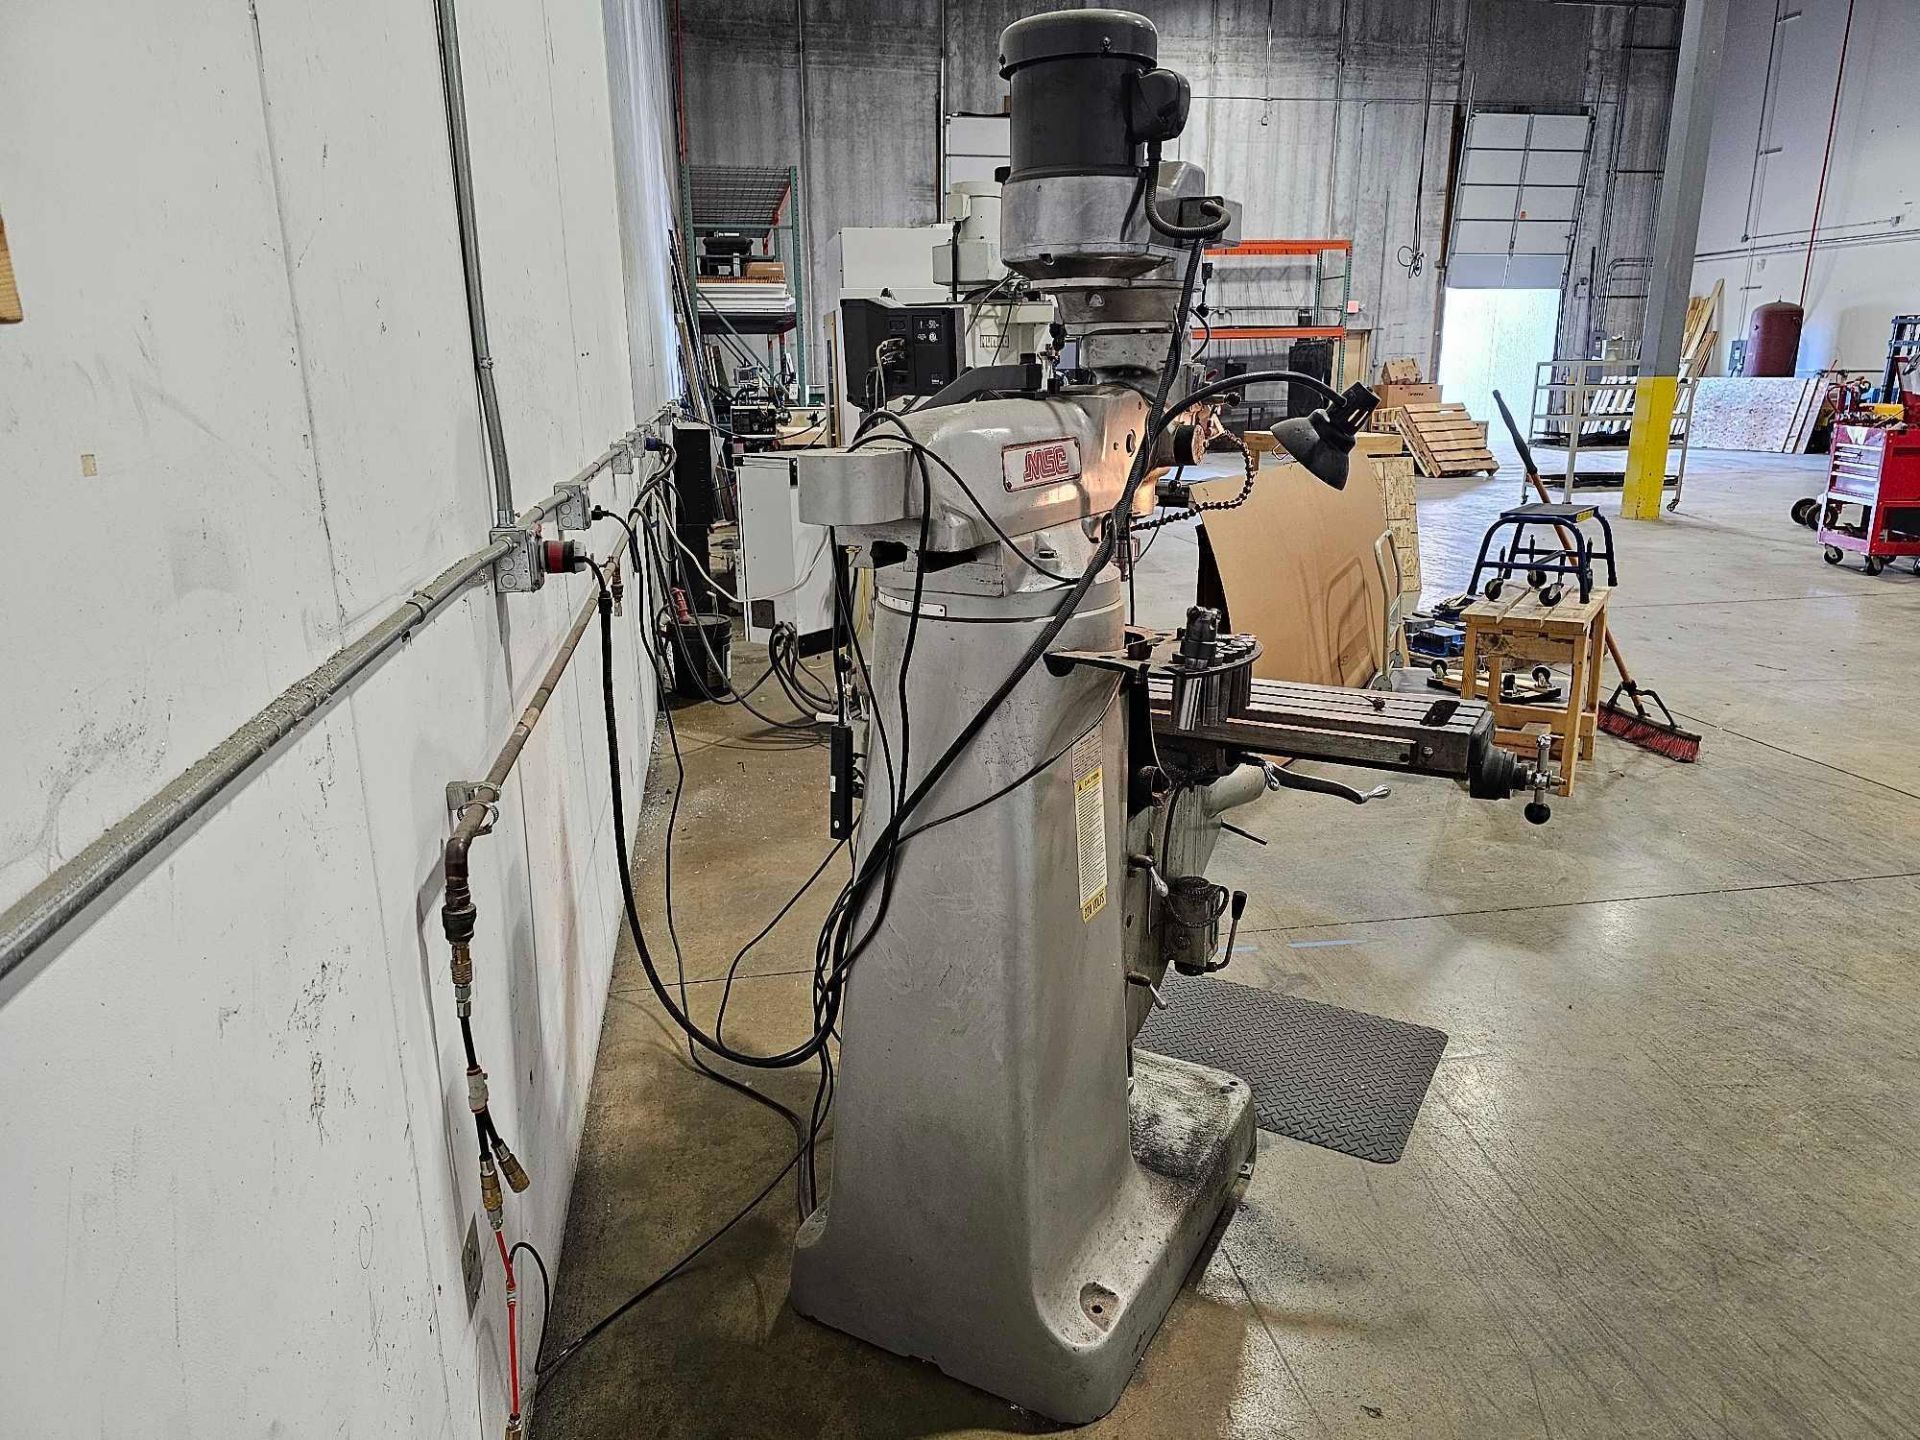 2007 9″ X 49″ KNEE MILLING MACHINE: 3 HP, VARIABLE SPEED, 3 PHASE, DRO, POWERFEED - Image 5 of 12